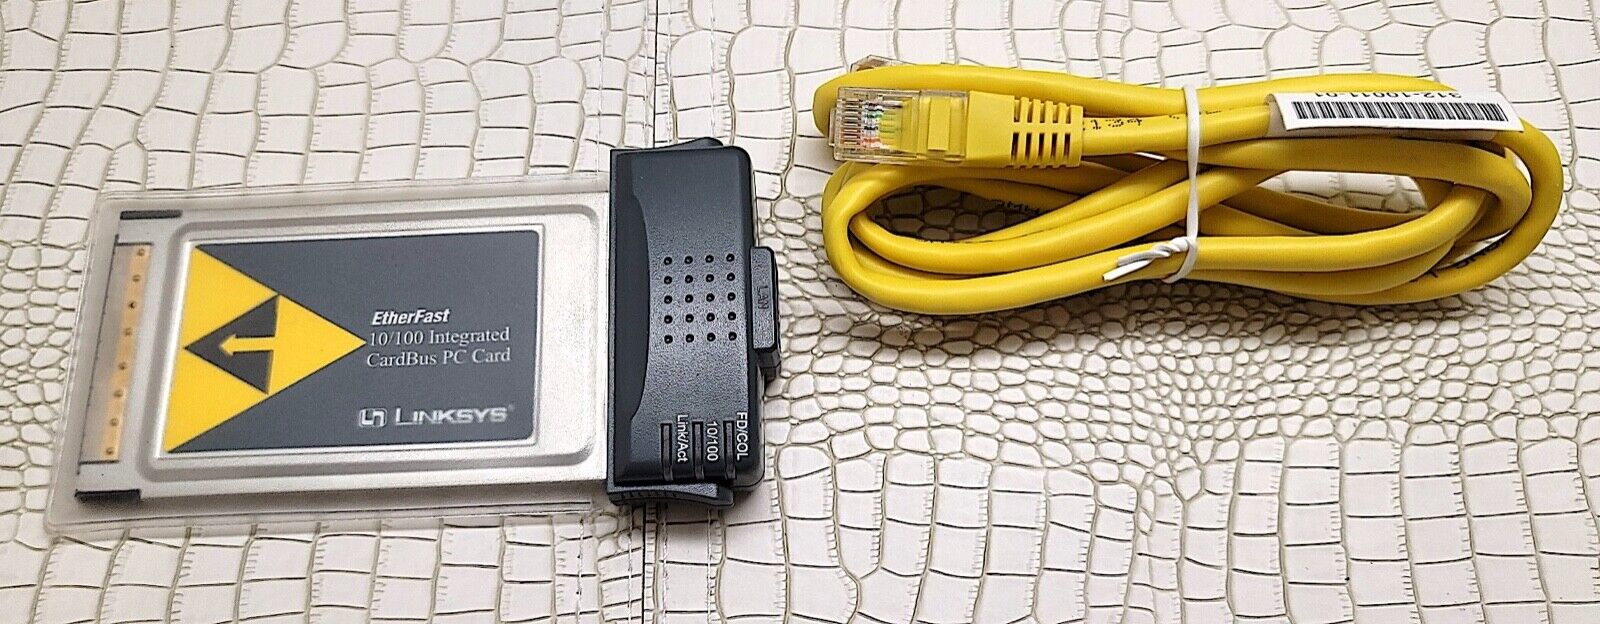 Unused Linksys PCM200 EtherFast Cardbus10/100 32-Bit Network Card with cable